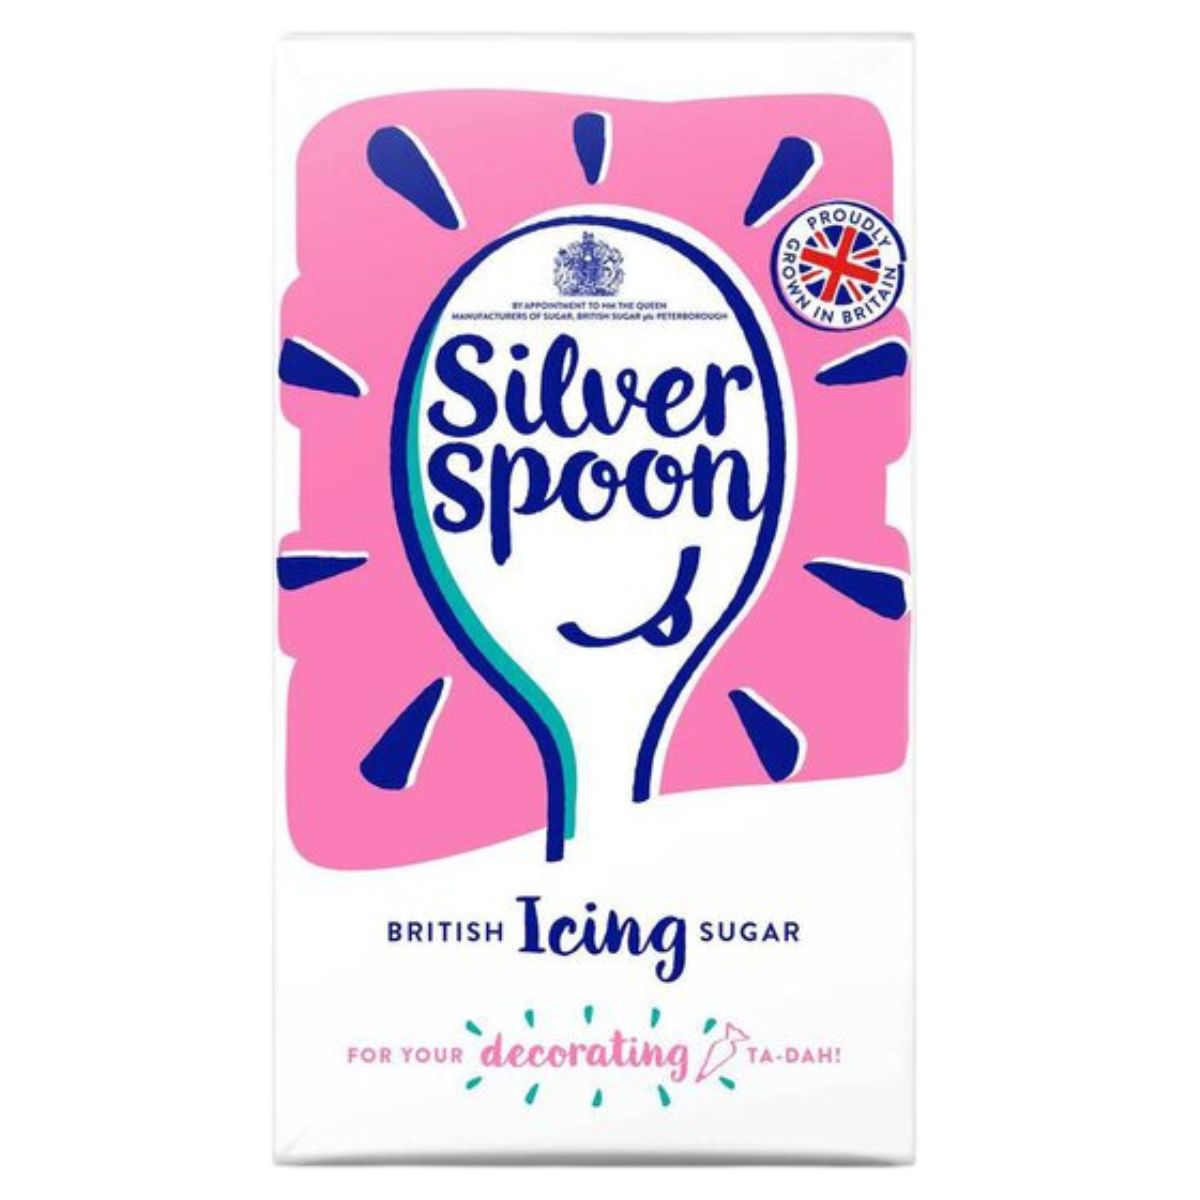 A package of Silver Spoon - British Icing Sugar - 500g with splash design and product branding.